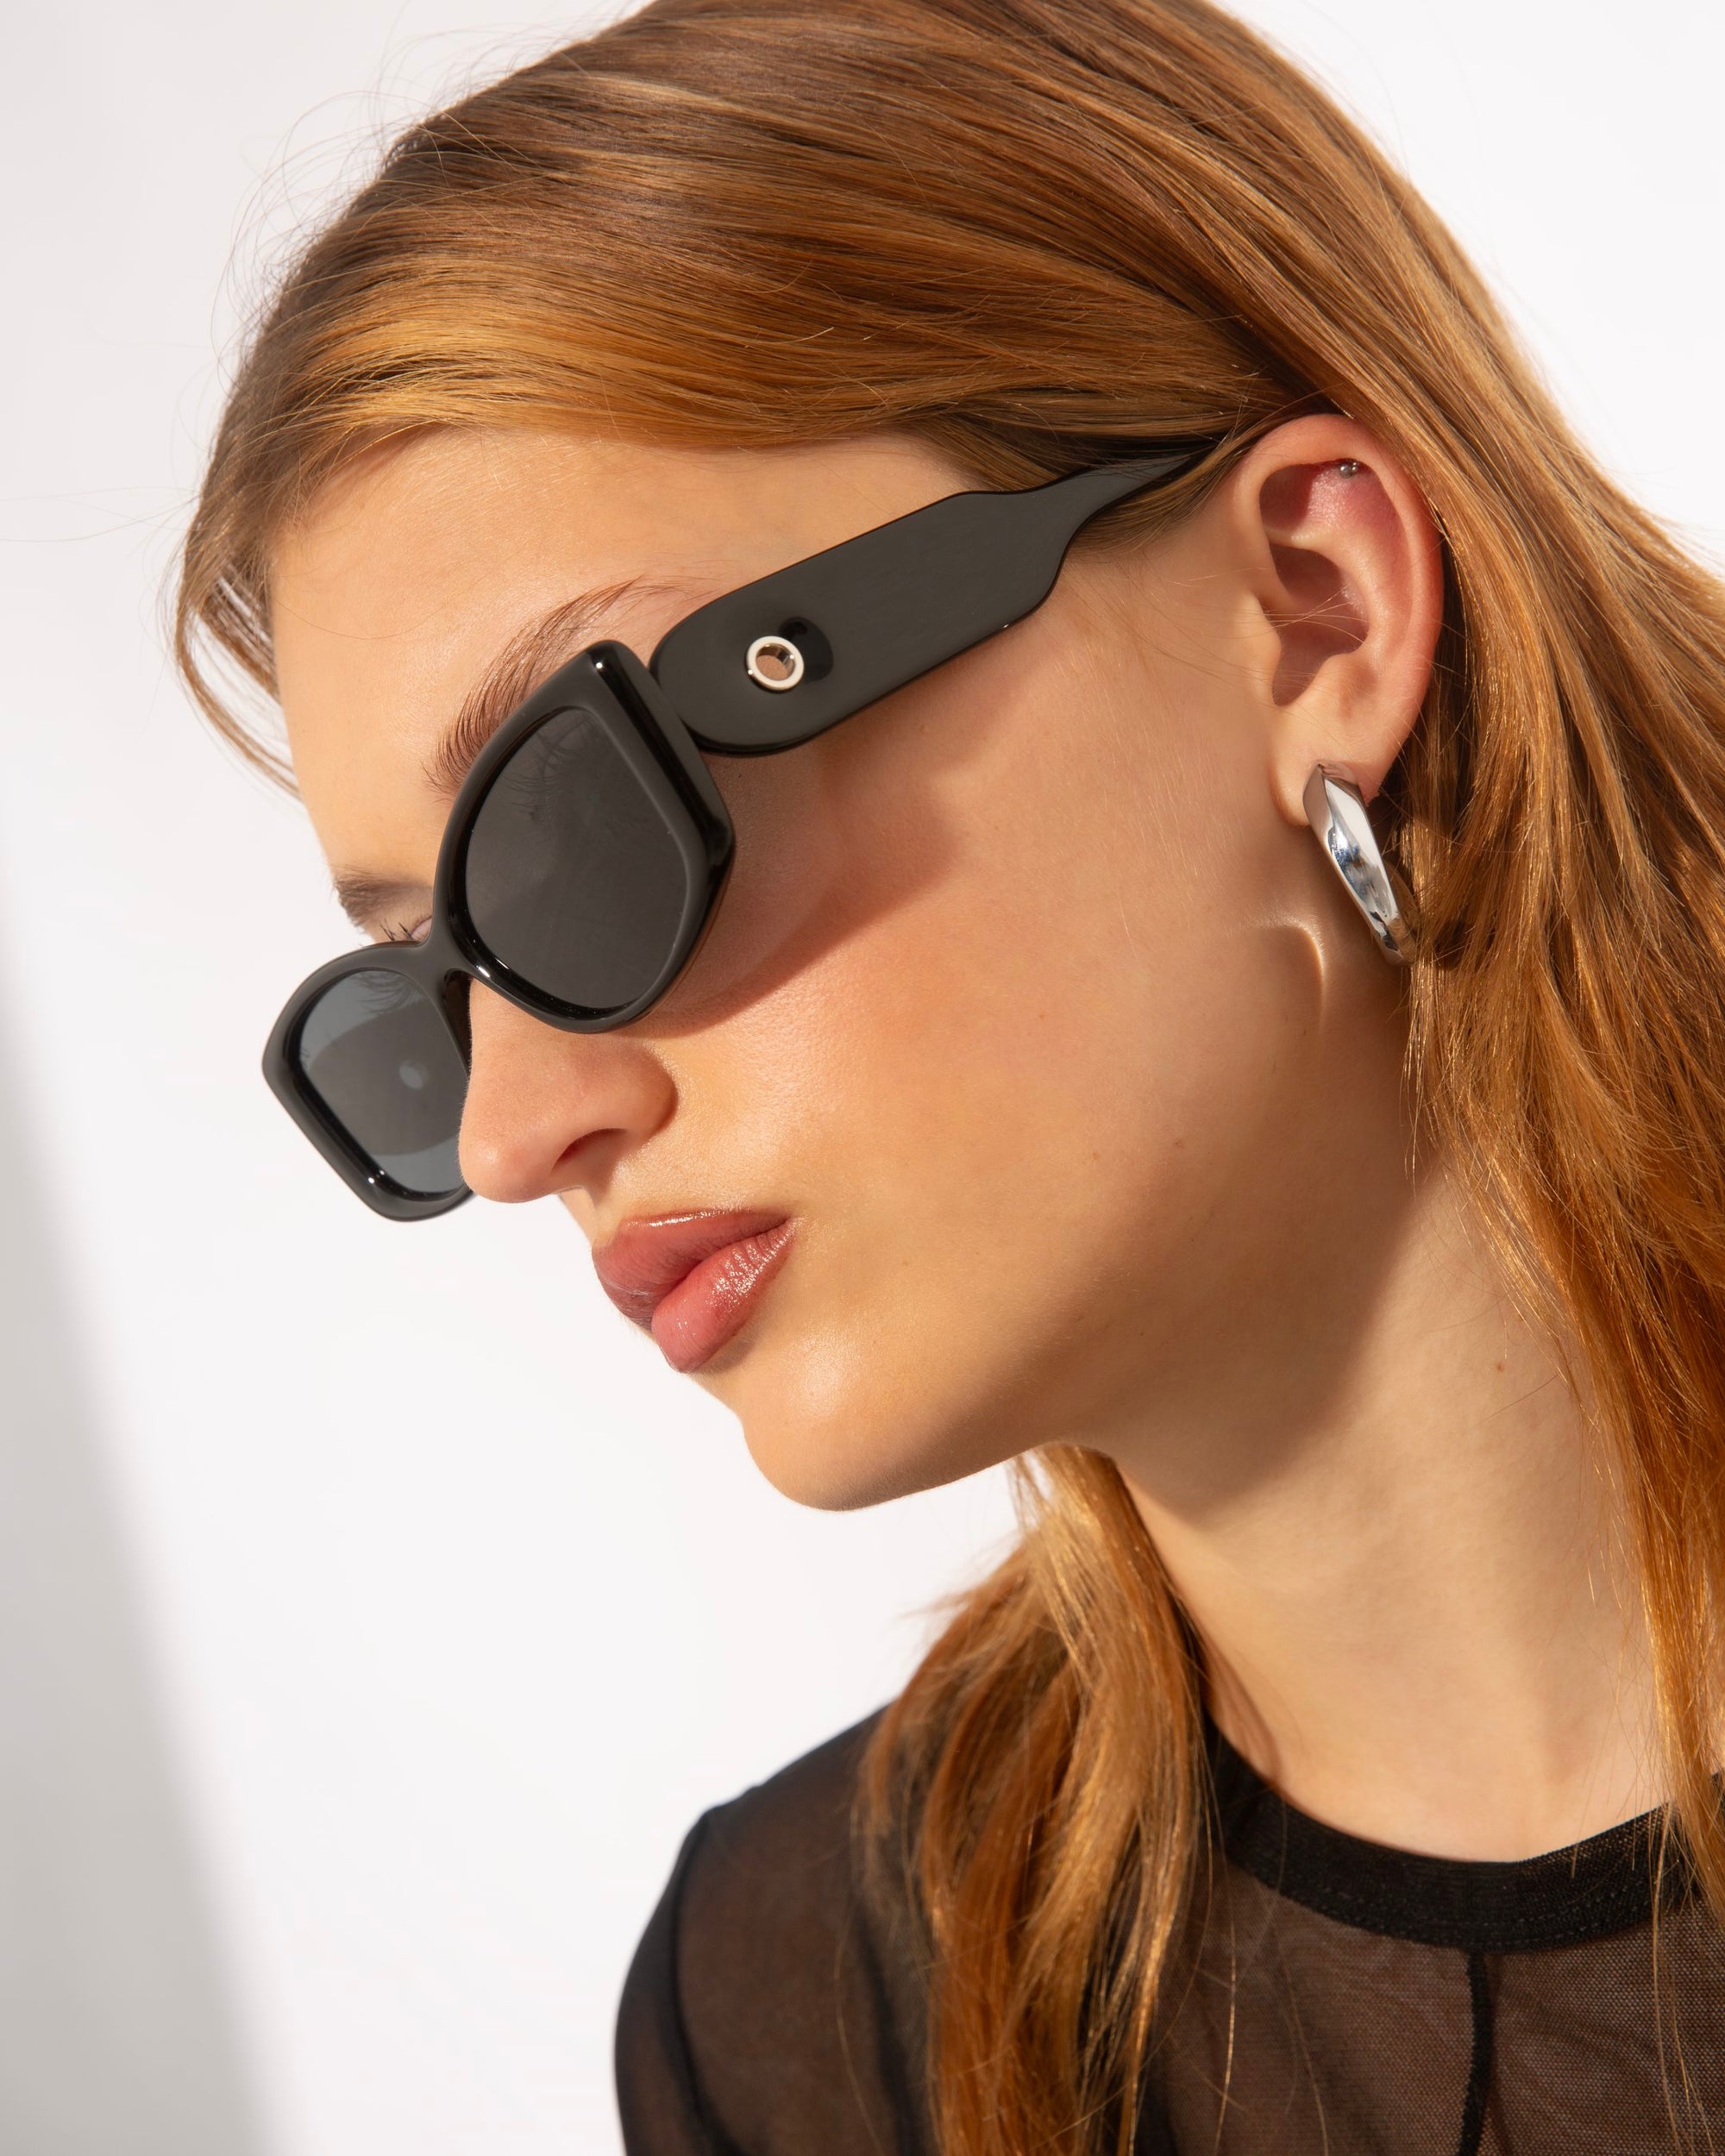 A person with light brown hair is wearing black For Art&#39;s Sake® Mene sunglasses and silver hoop earrings. They are dressed in a black top and are looking to the side, showcasing their chic Cat-Eye silhouette. The background is plain white.